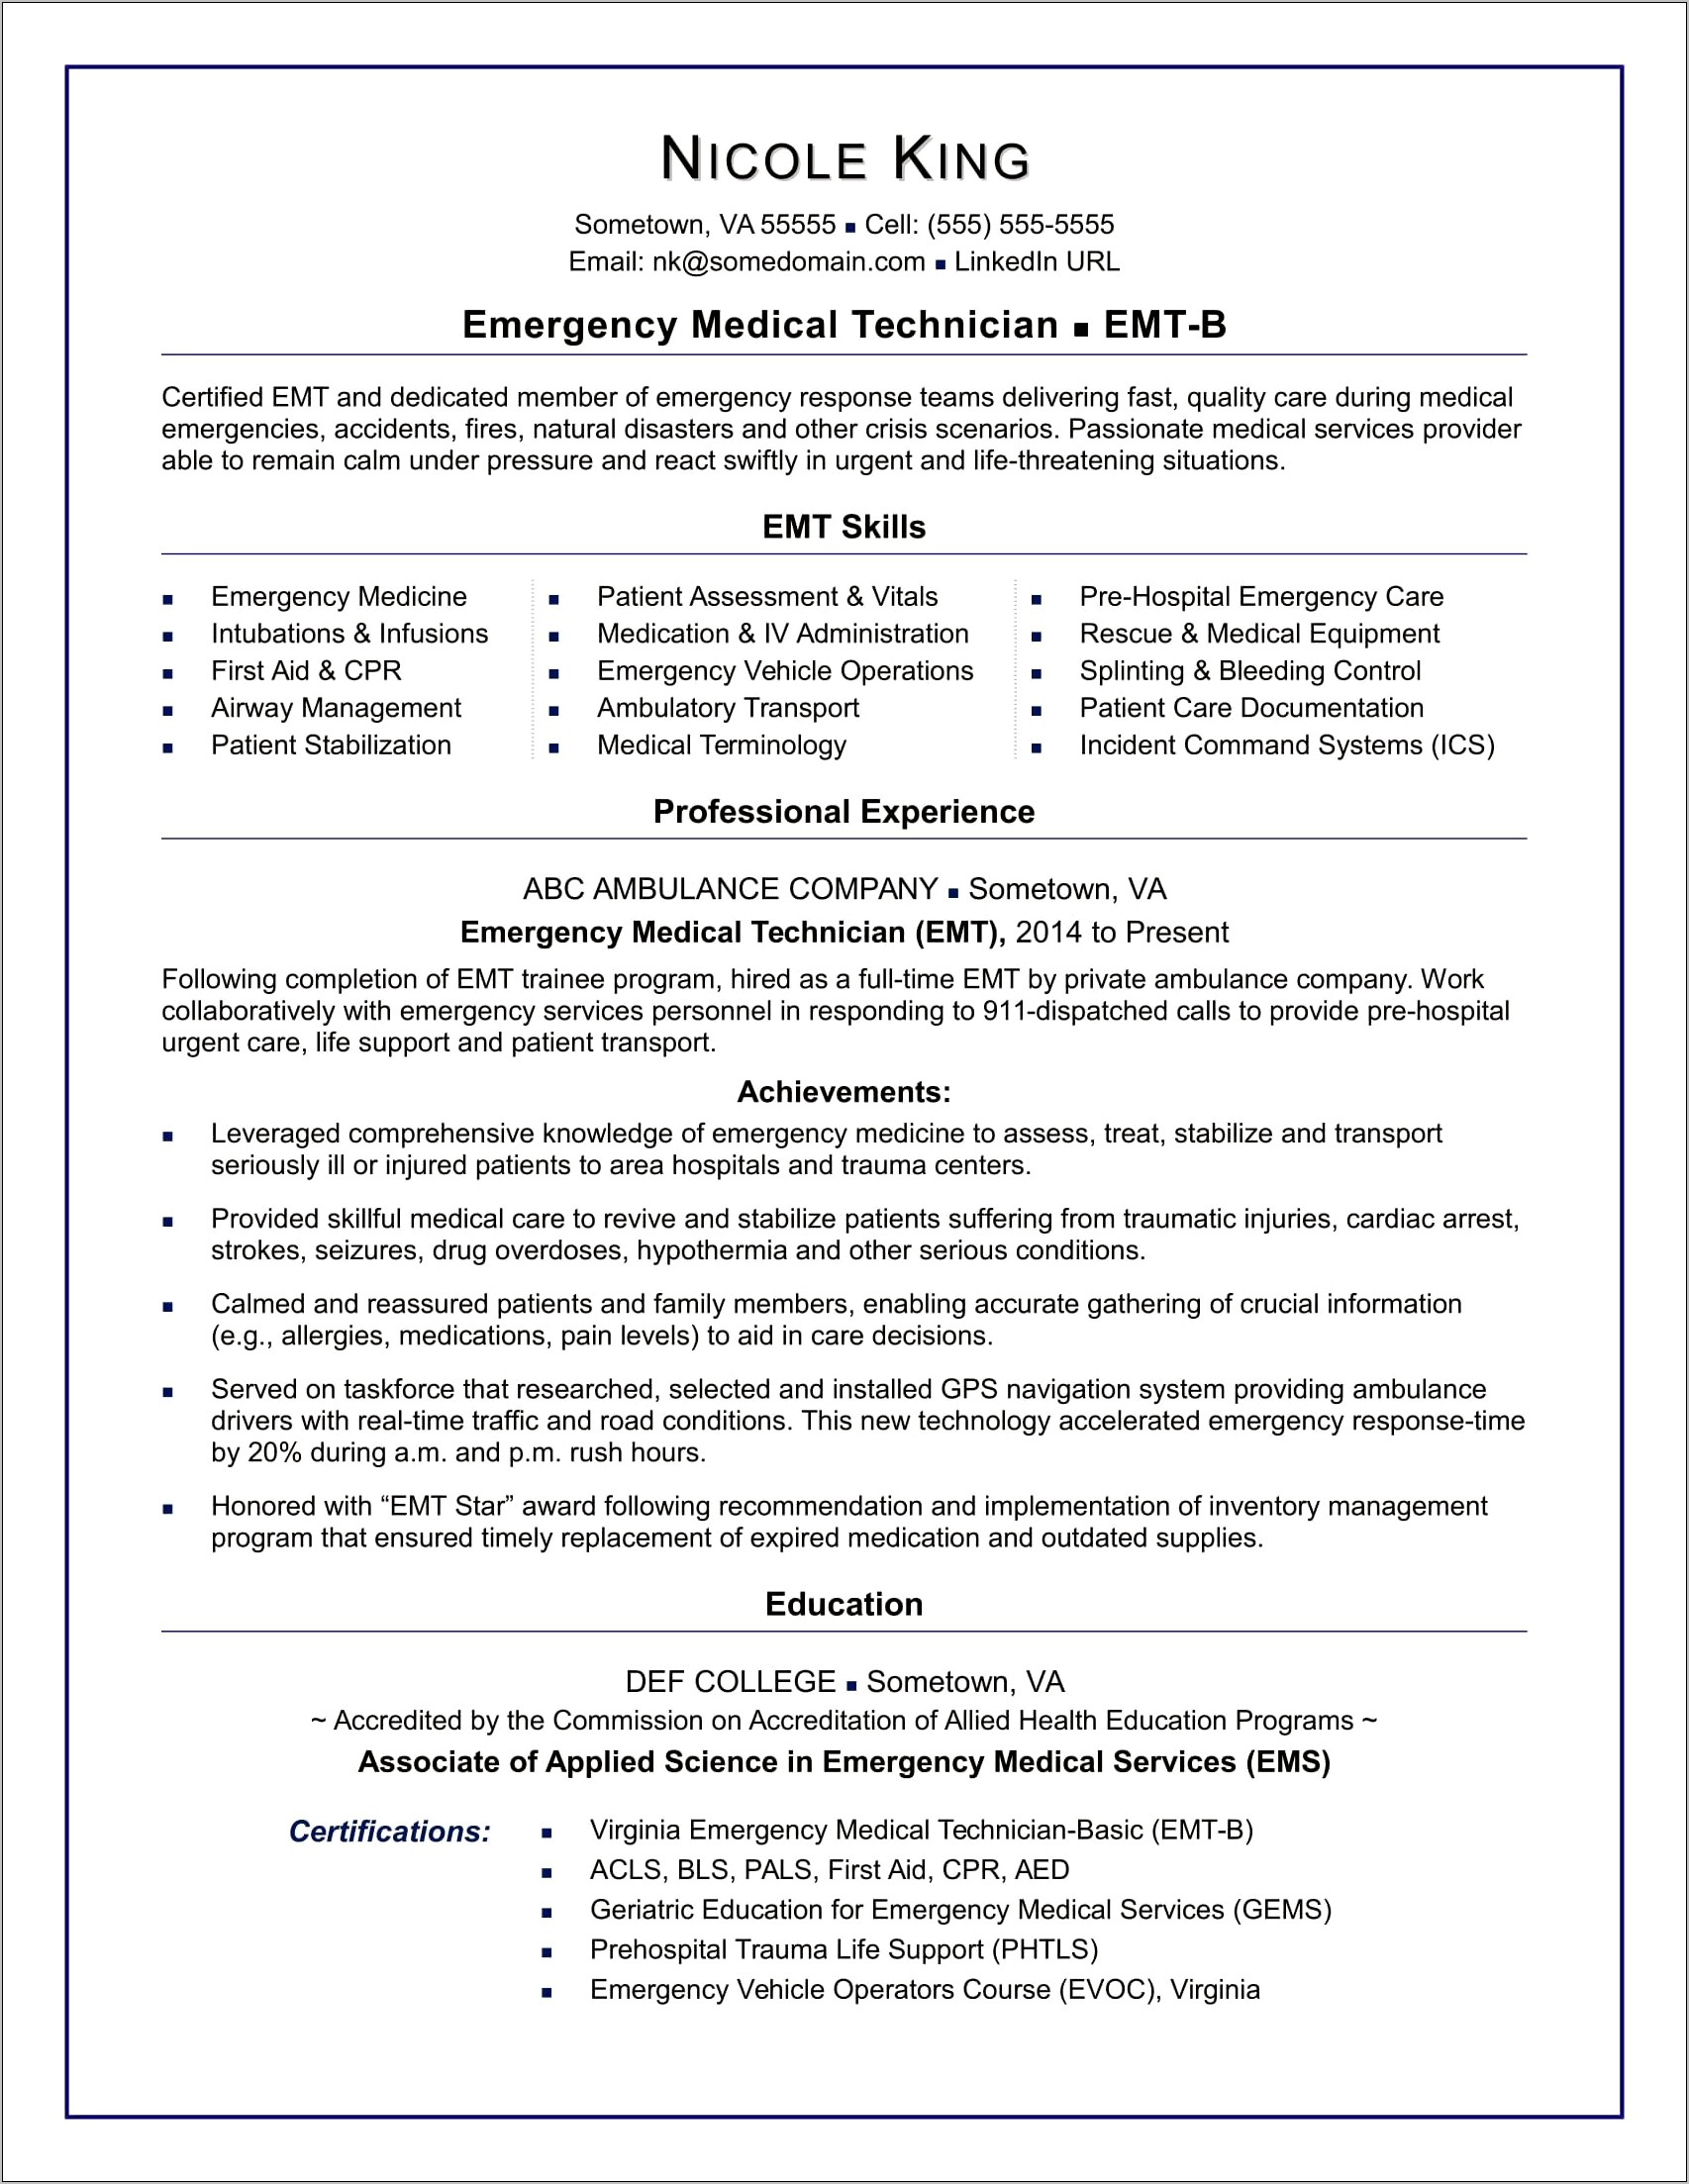 Resume Objective For Emergency Room Technician